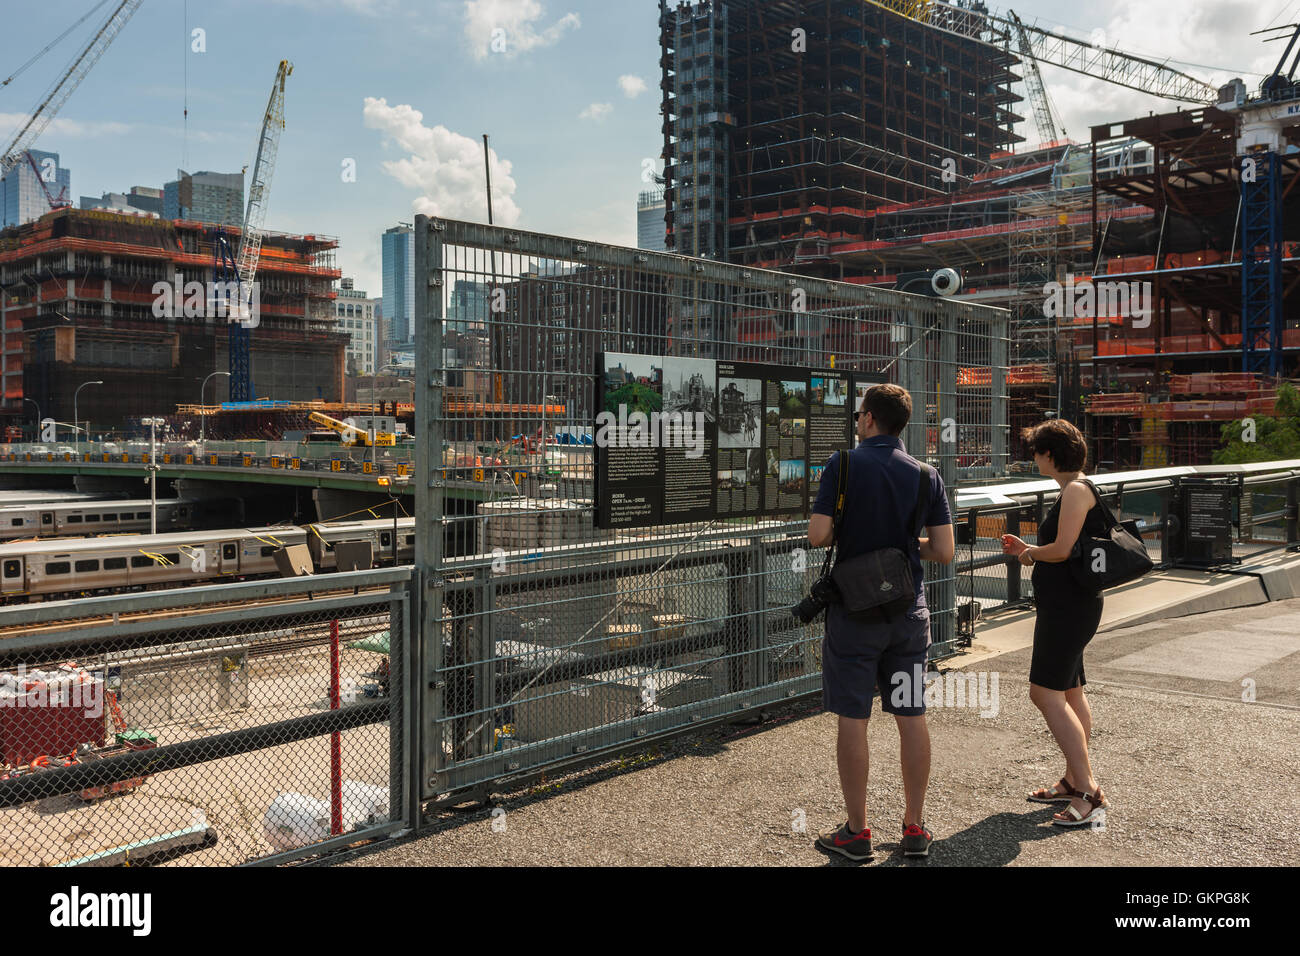 Tourists read a sign with information on the High Line extension near the Hudson Yards development in New York City. Stock Photo